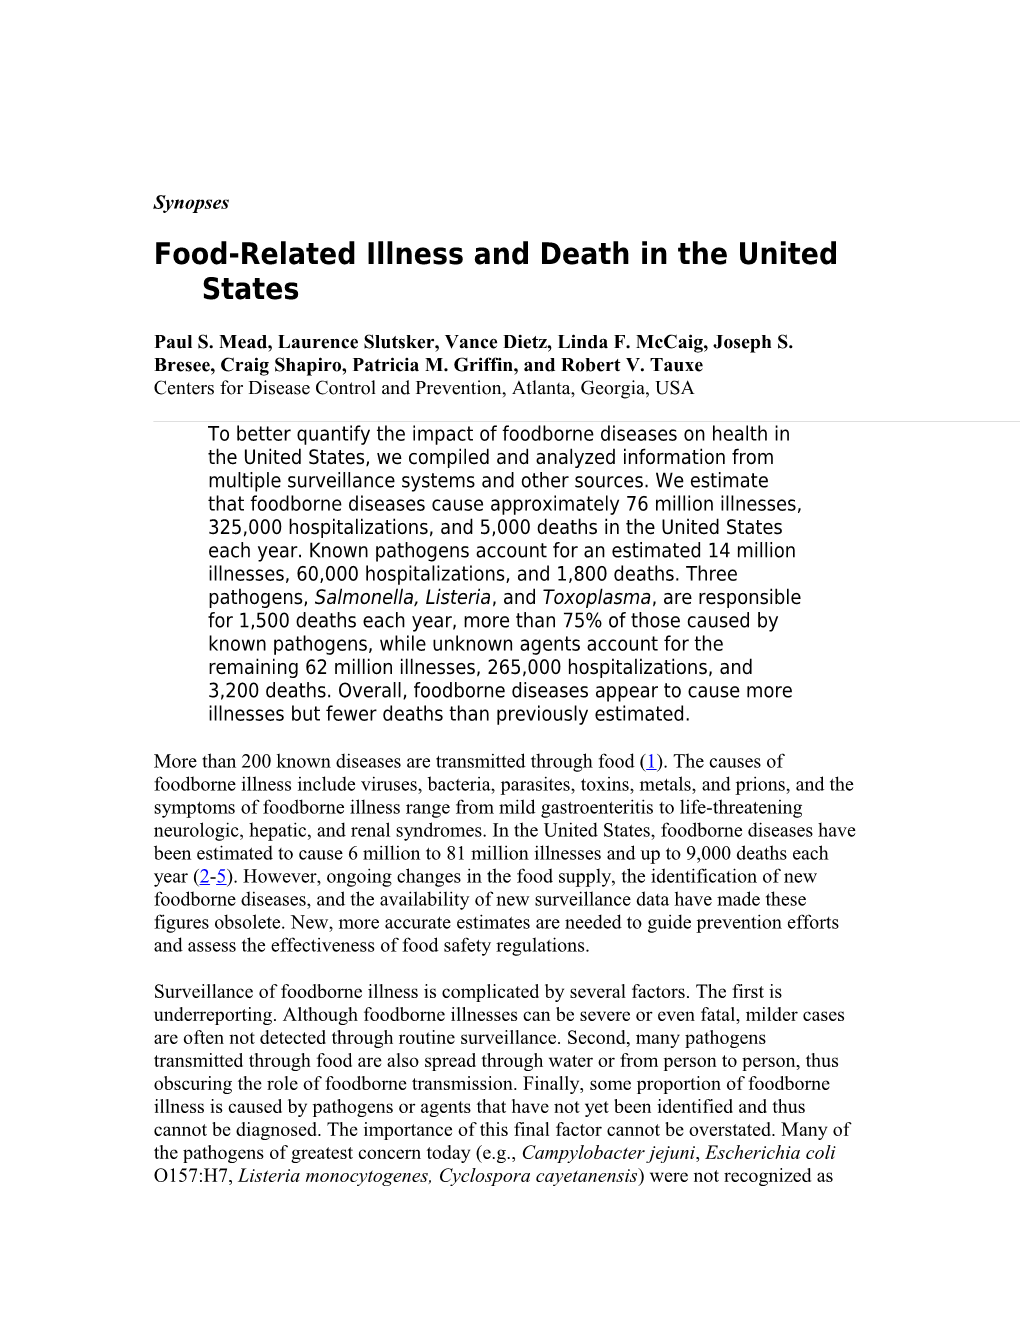 Food-Related Illness and Death in the United States